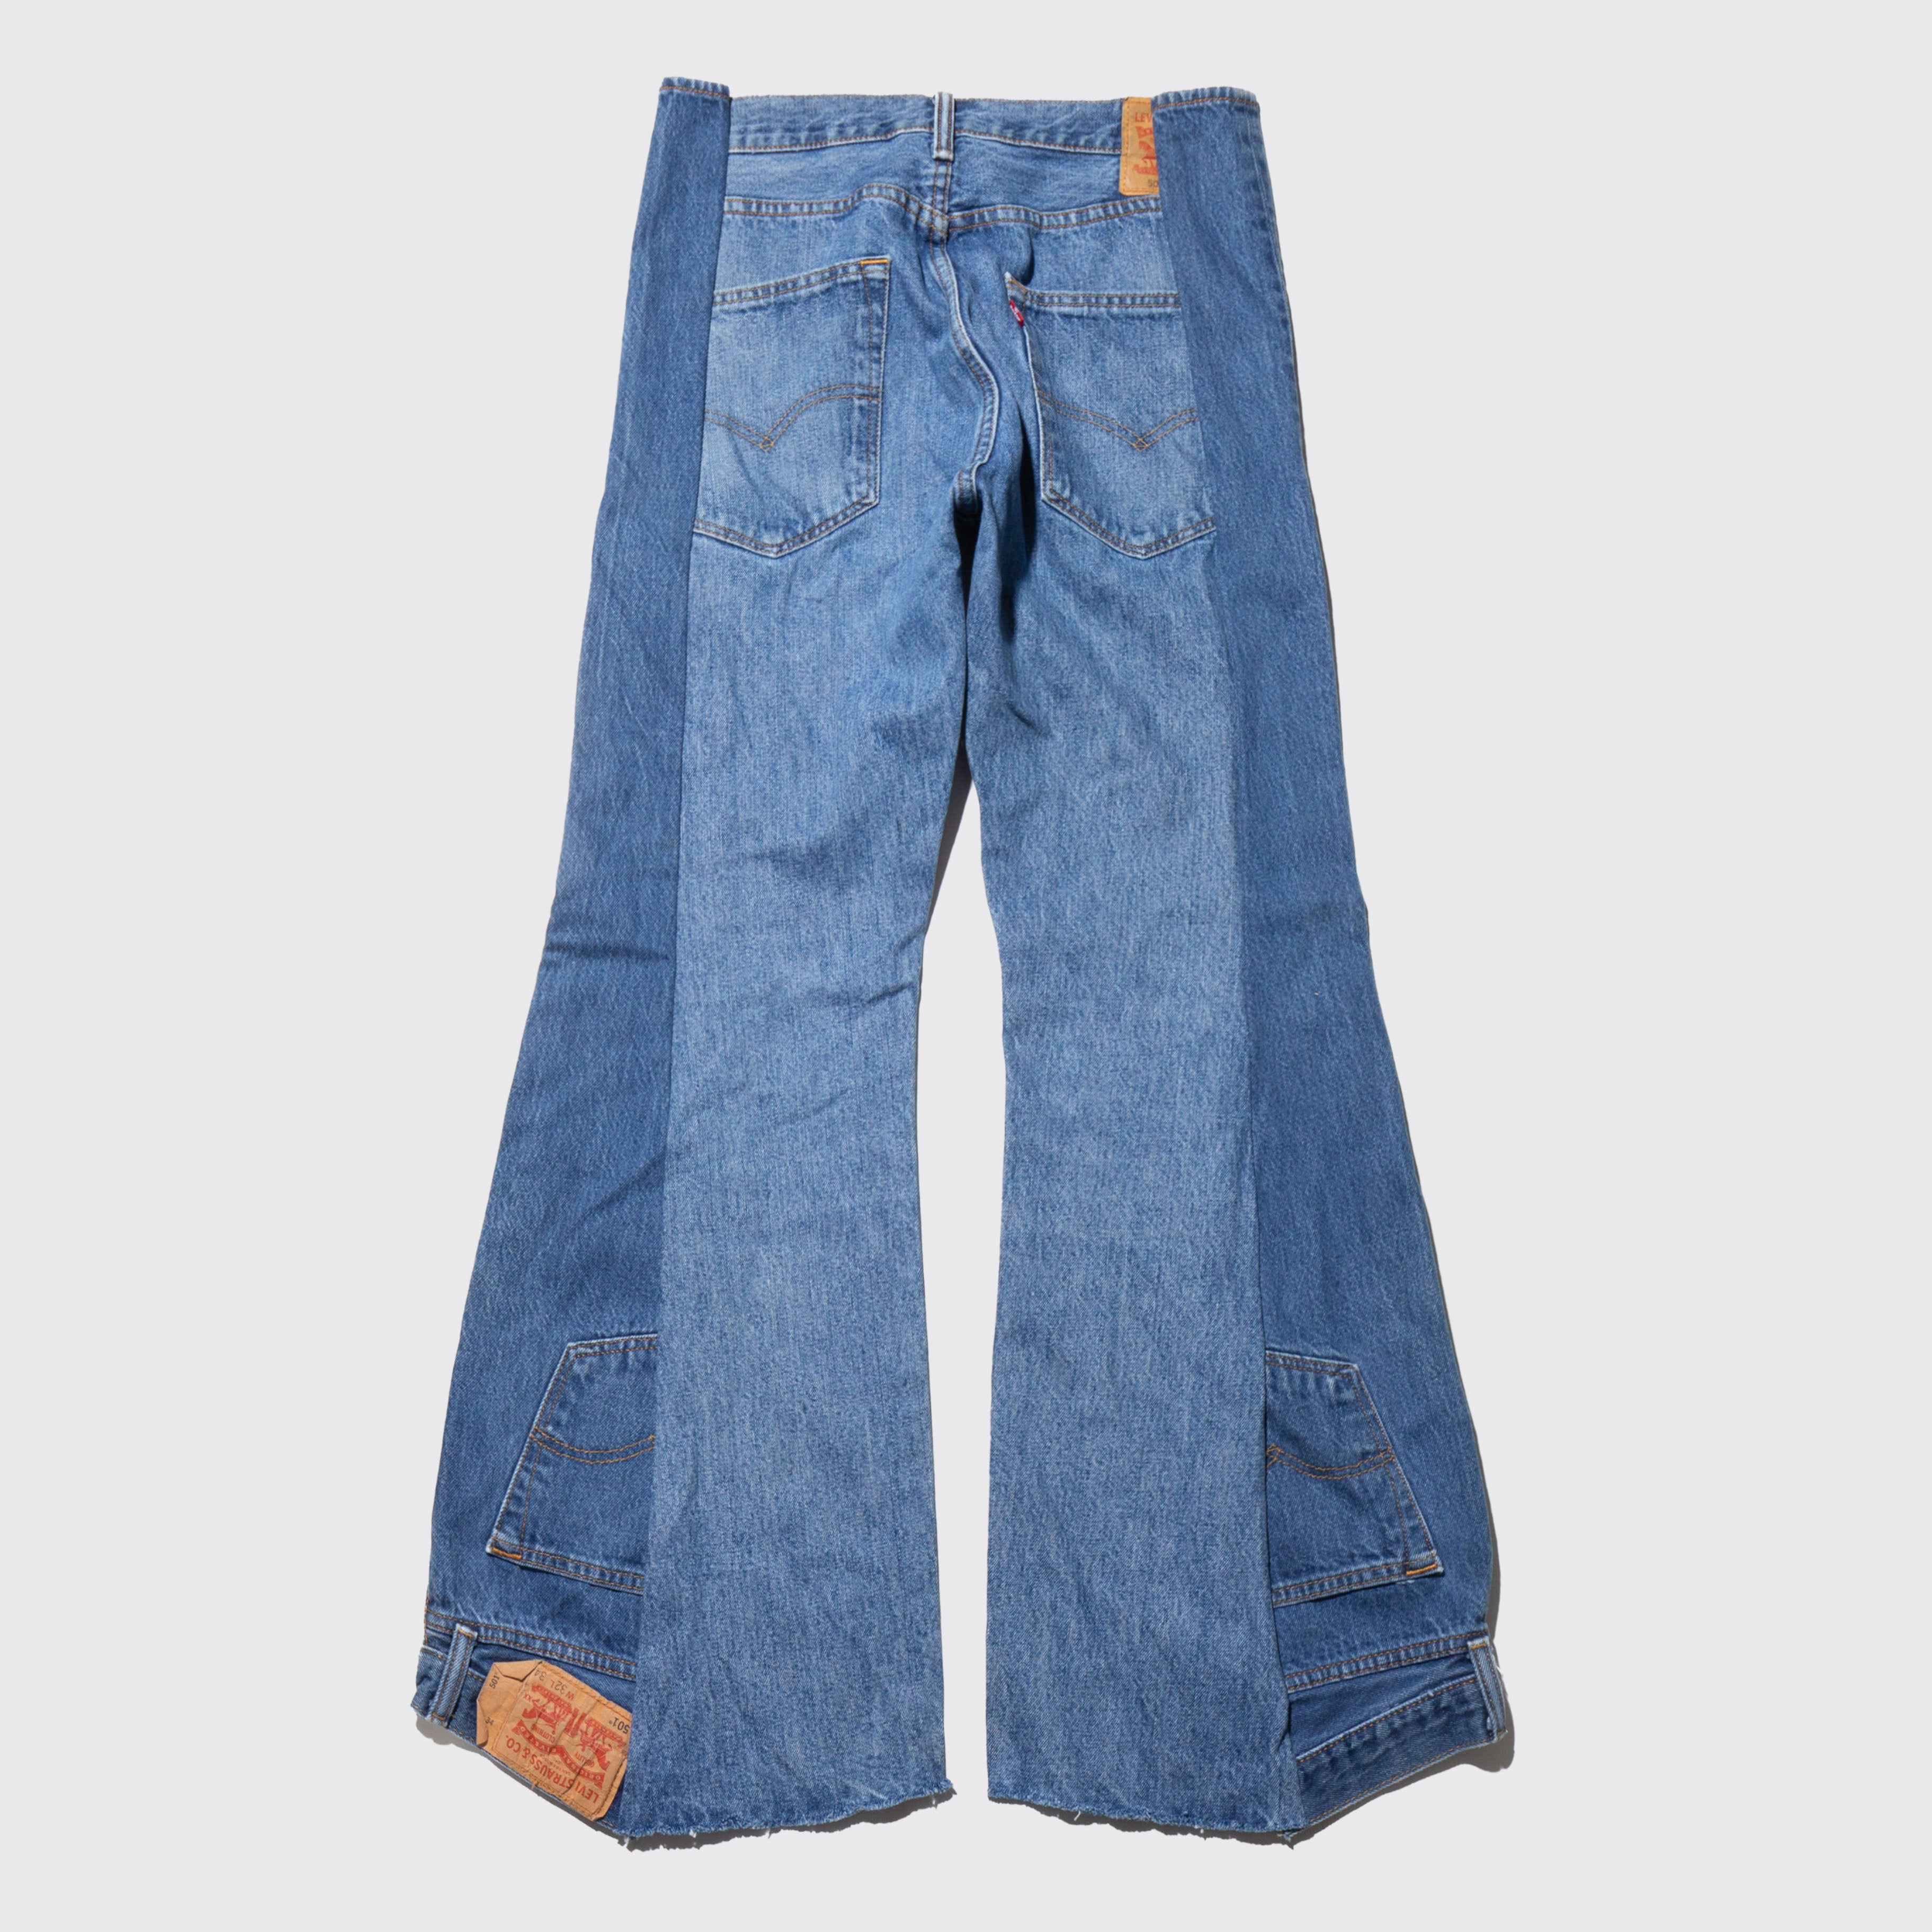 remake upside down jeans – NOILL